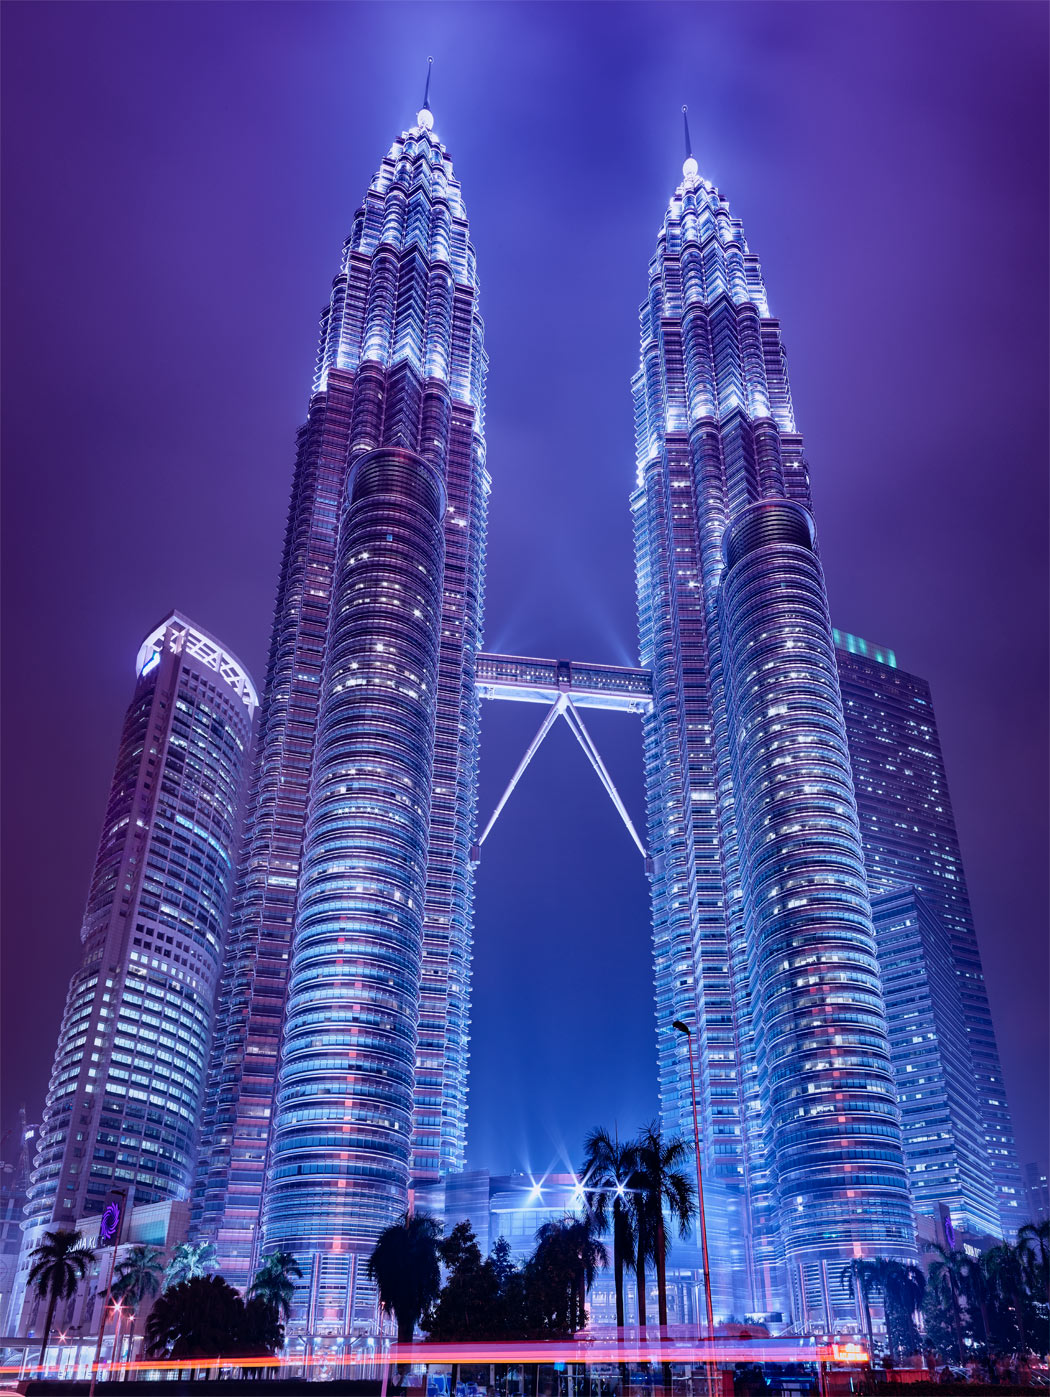 Petronas Towers Storm Clouds Night Haze Pollution Air Quality Malaysia 2015 October September Sky Long Exposure Cityscapes By Paul Reiffer Professional Medium Format Photographer